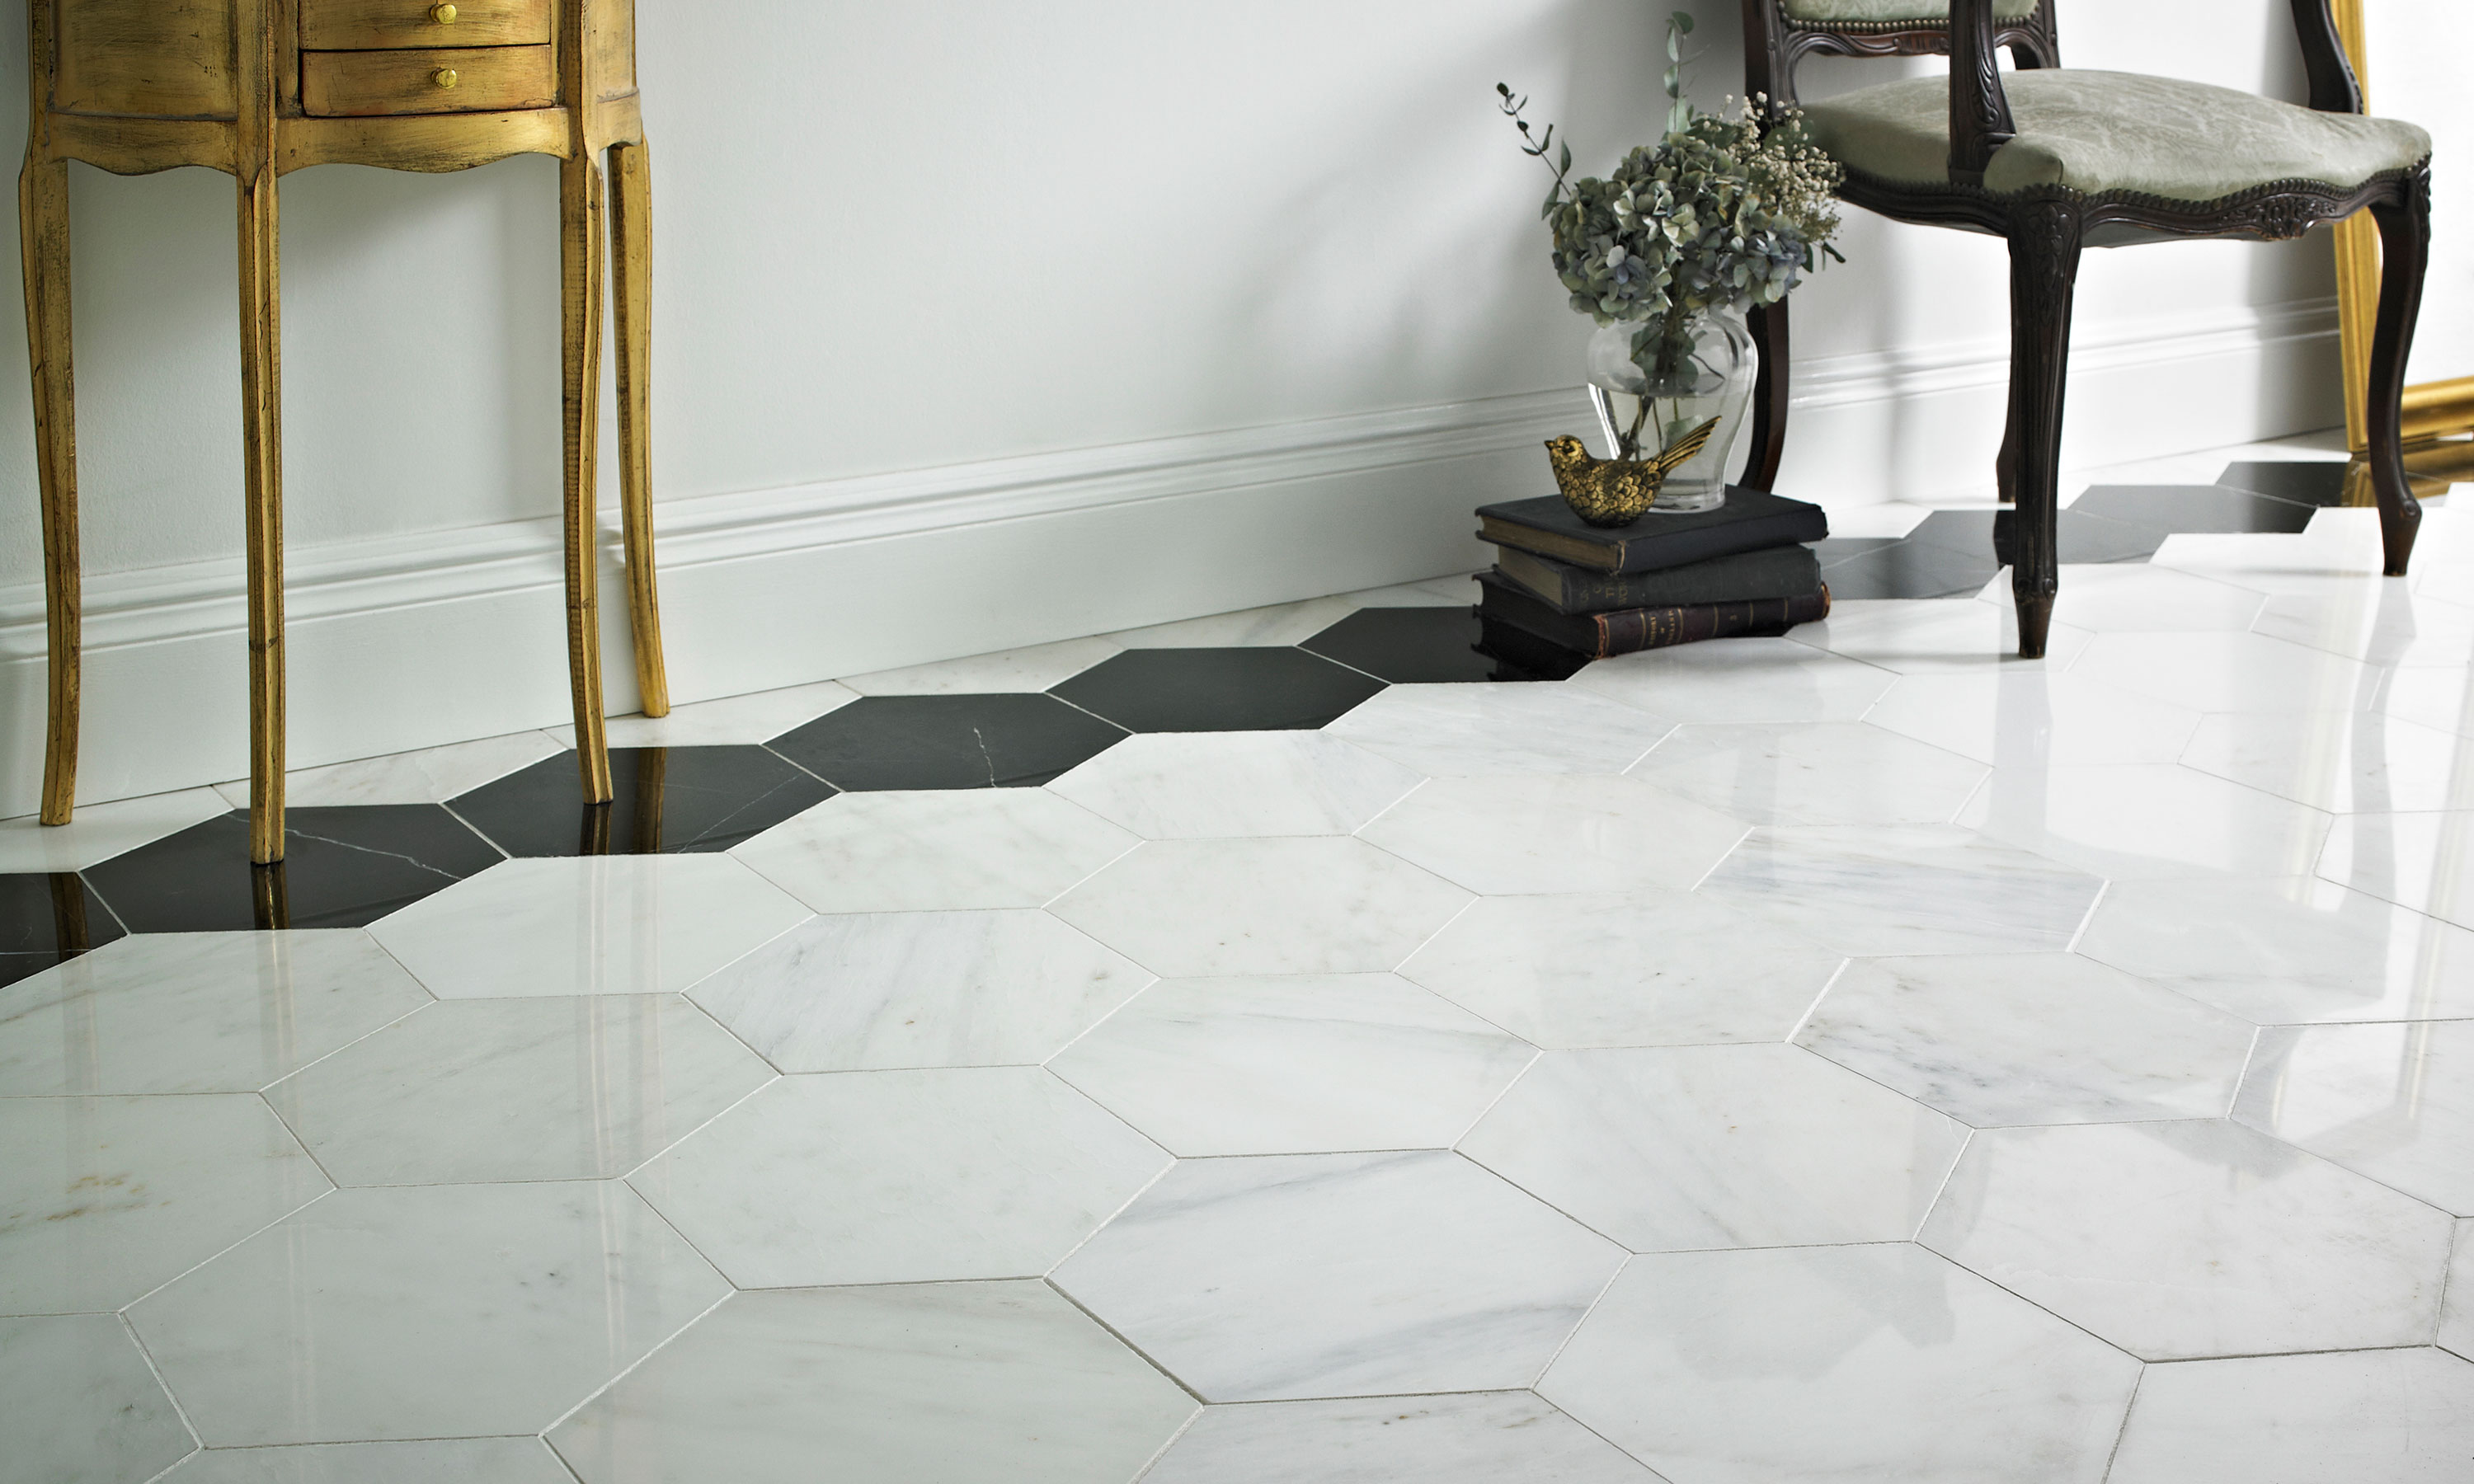 14 types of floor tiles – beautiful, hard-wearing and on budget | Real Homes